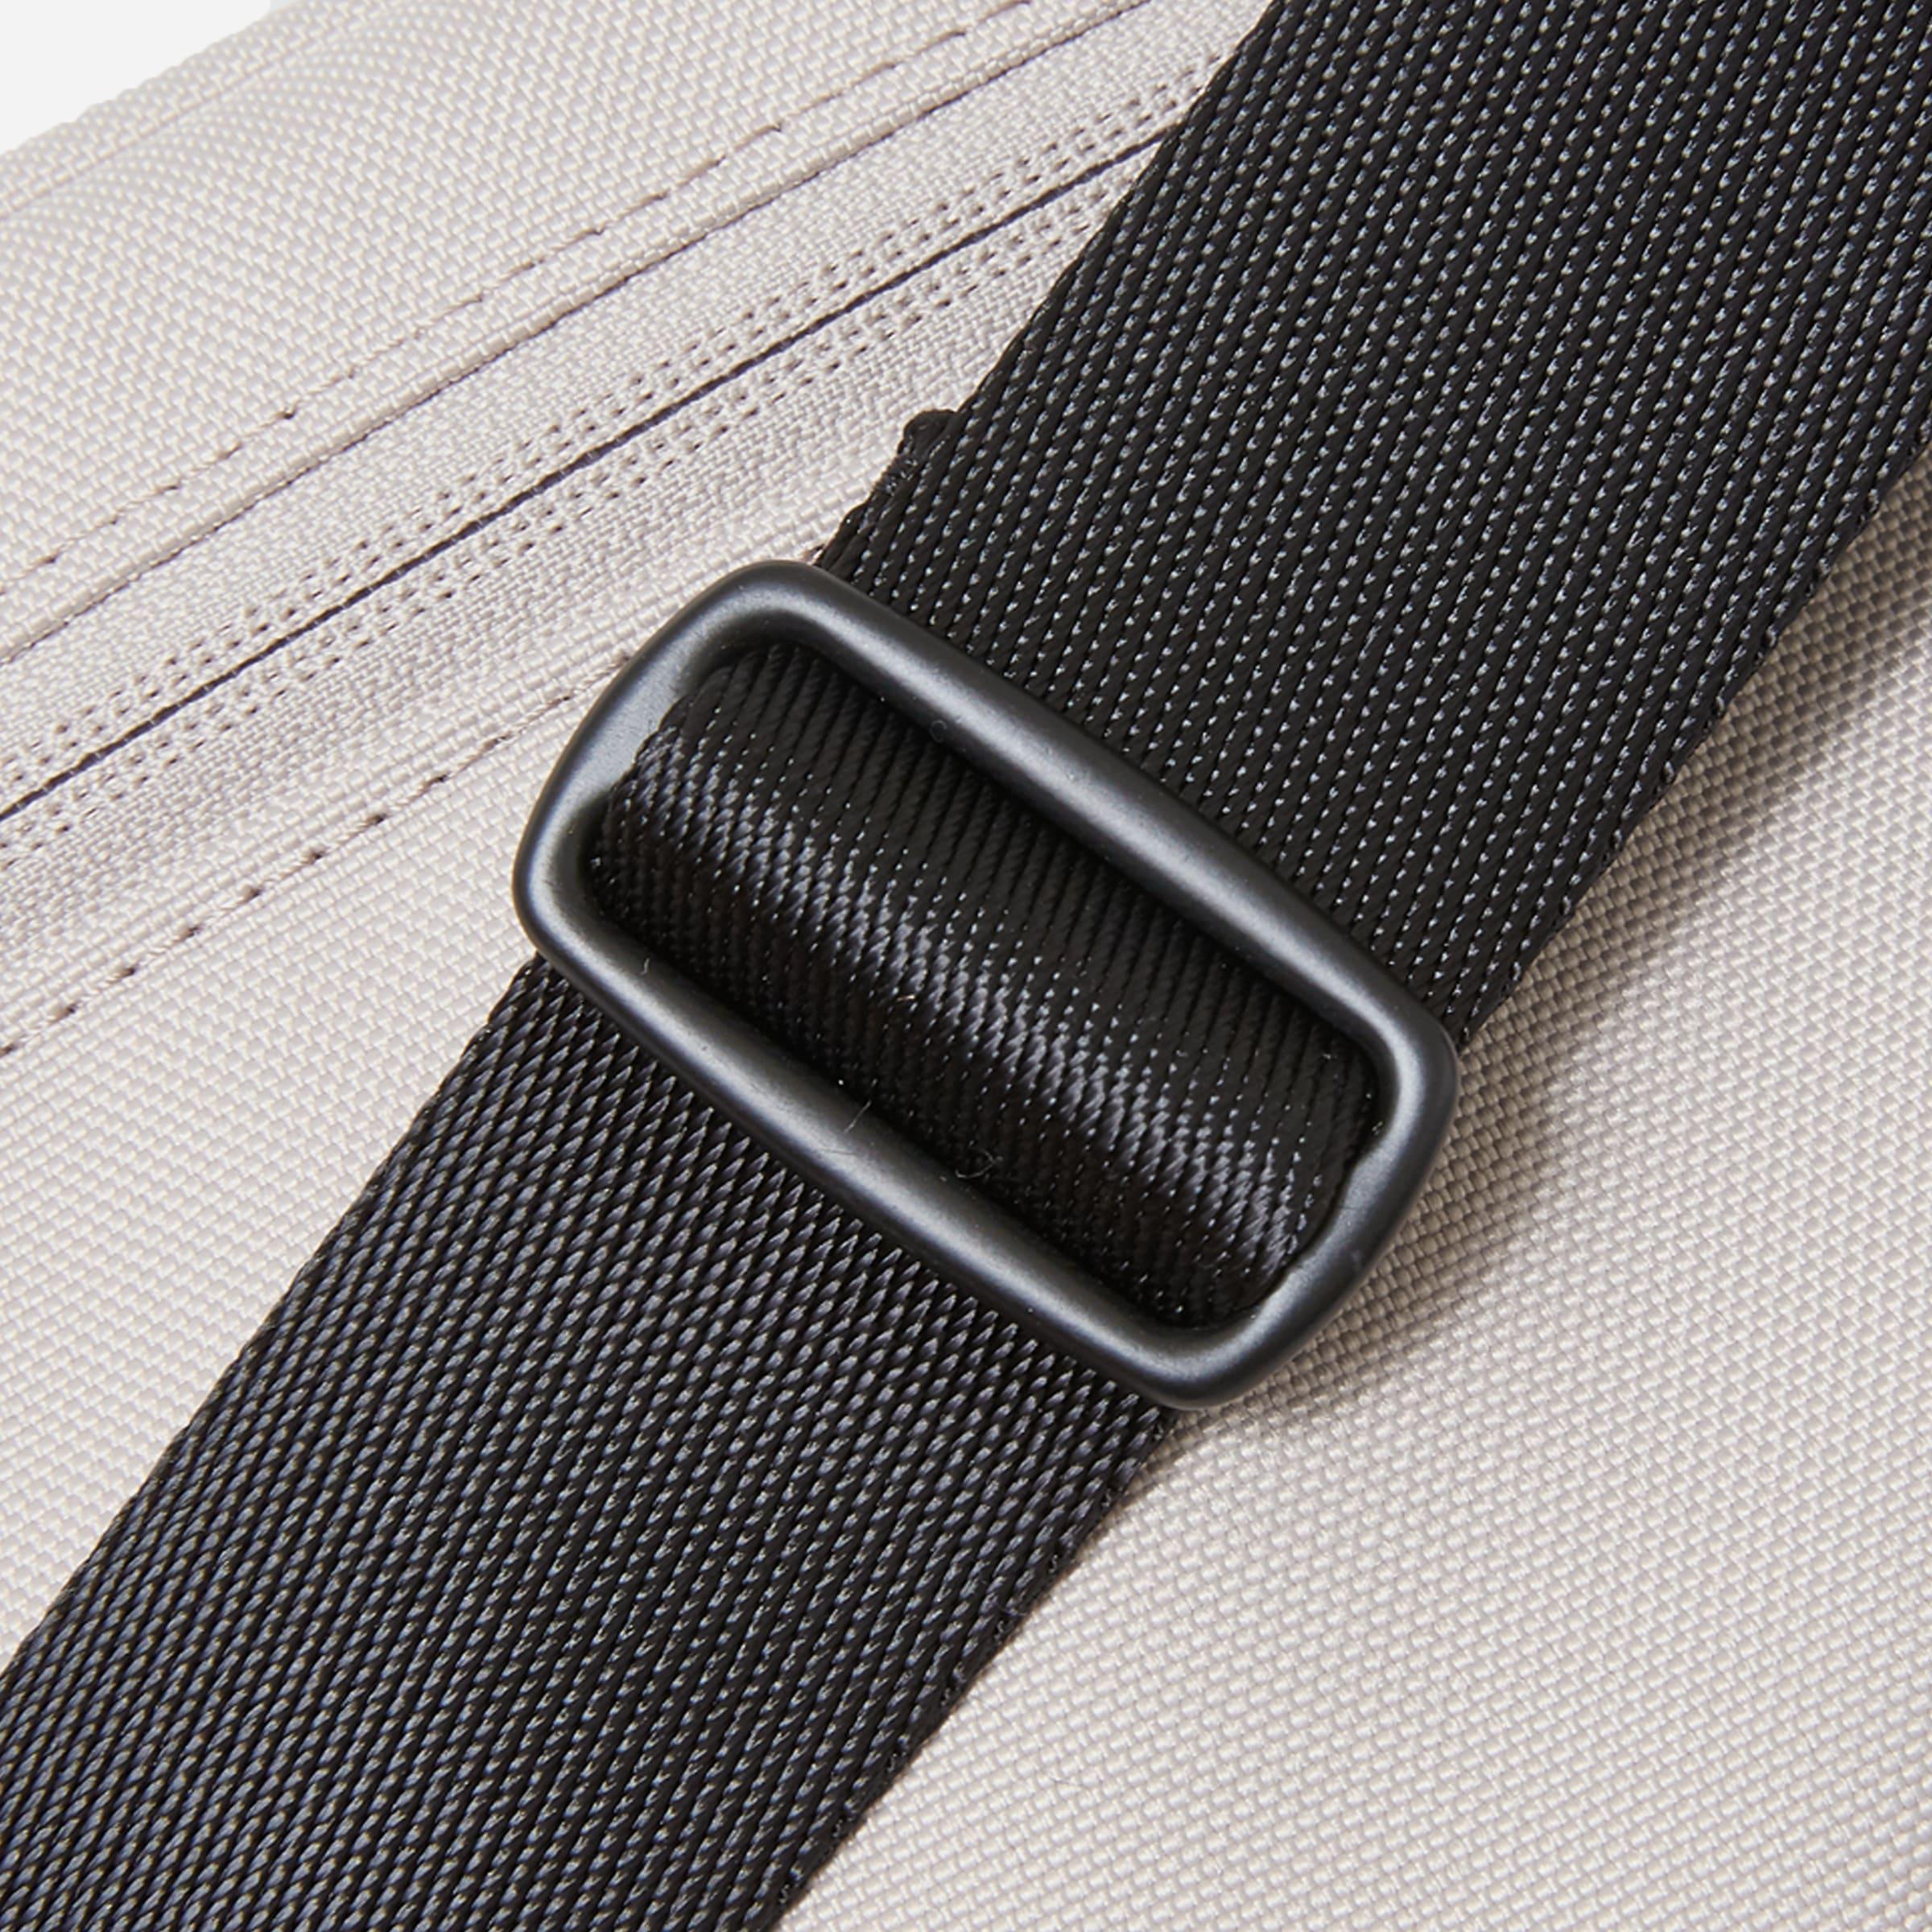 The Renew Transit Fanny Pack by EVERLANE